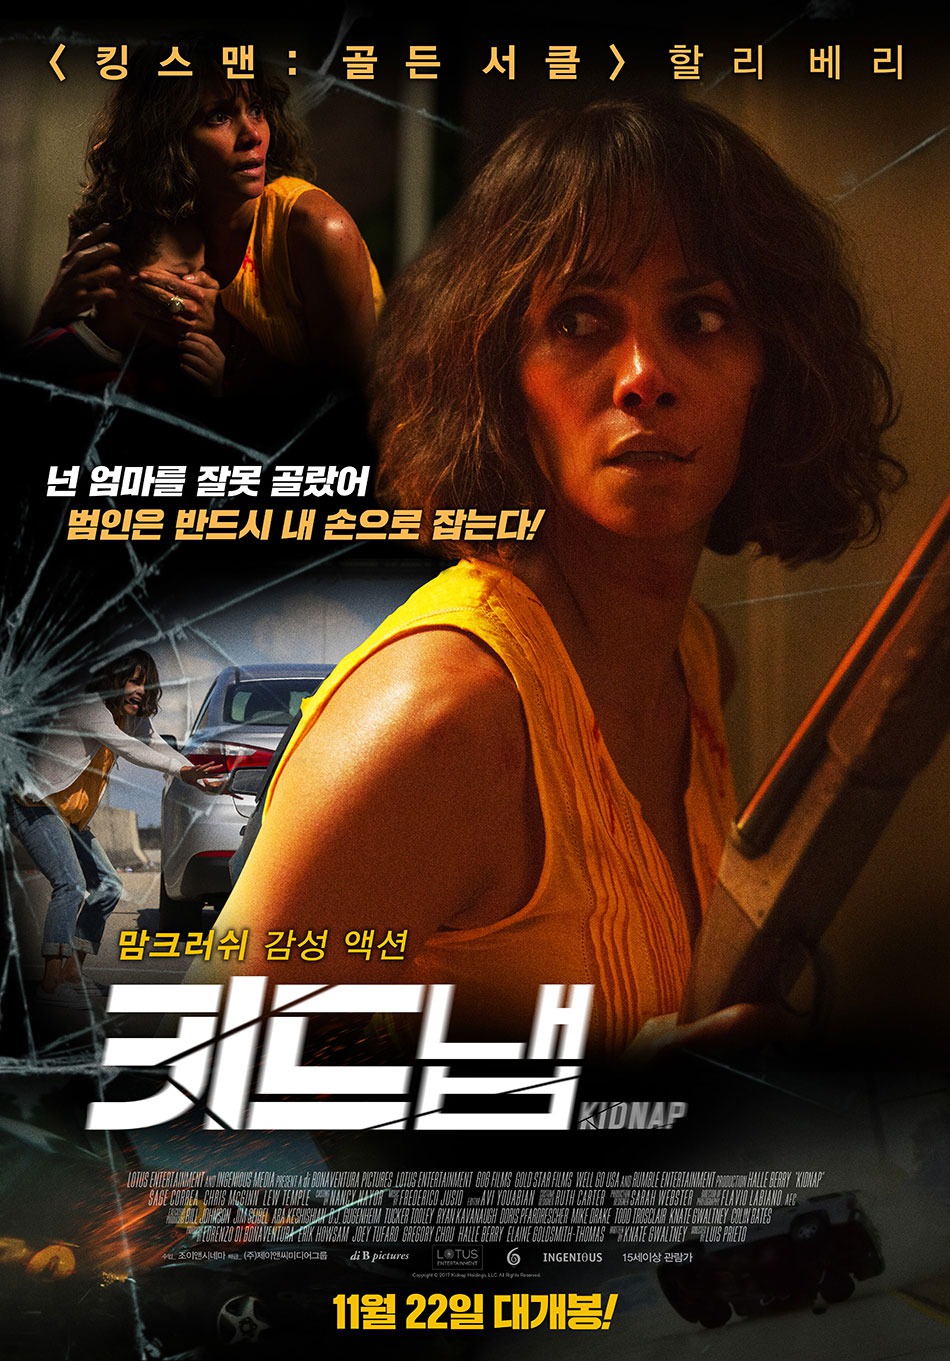 Extra Large Movie Poster Image for Kidnap (#4 of 4)